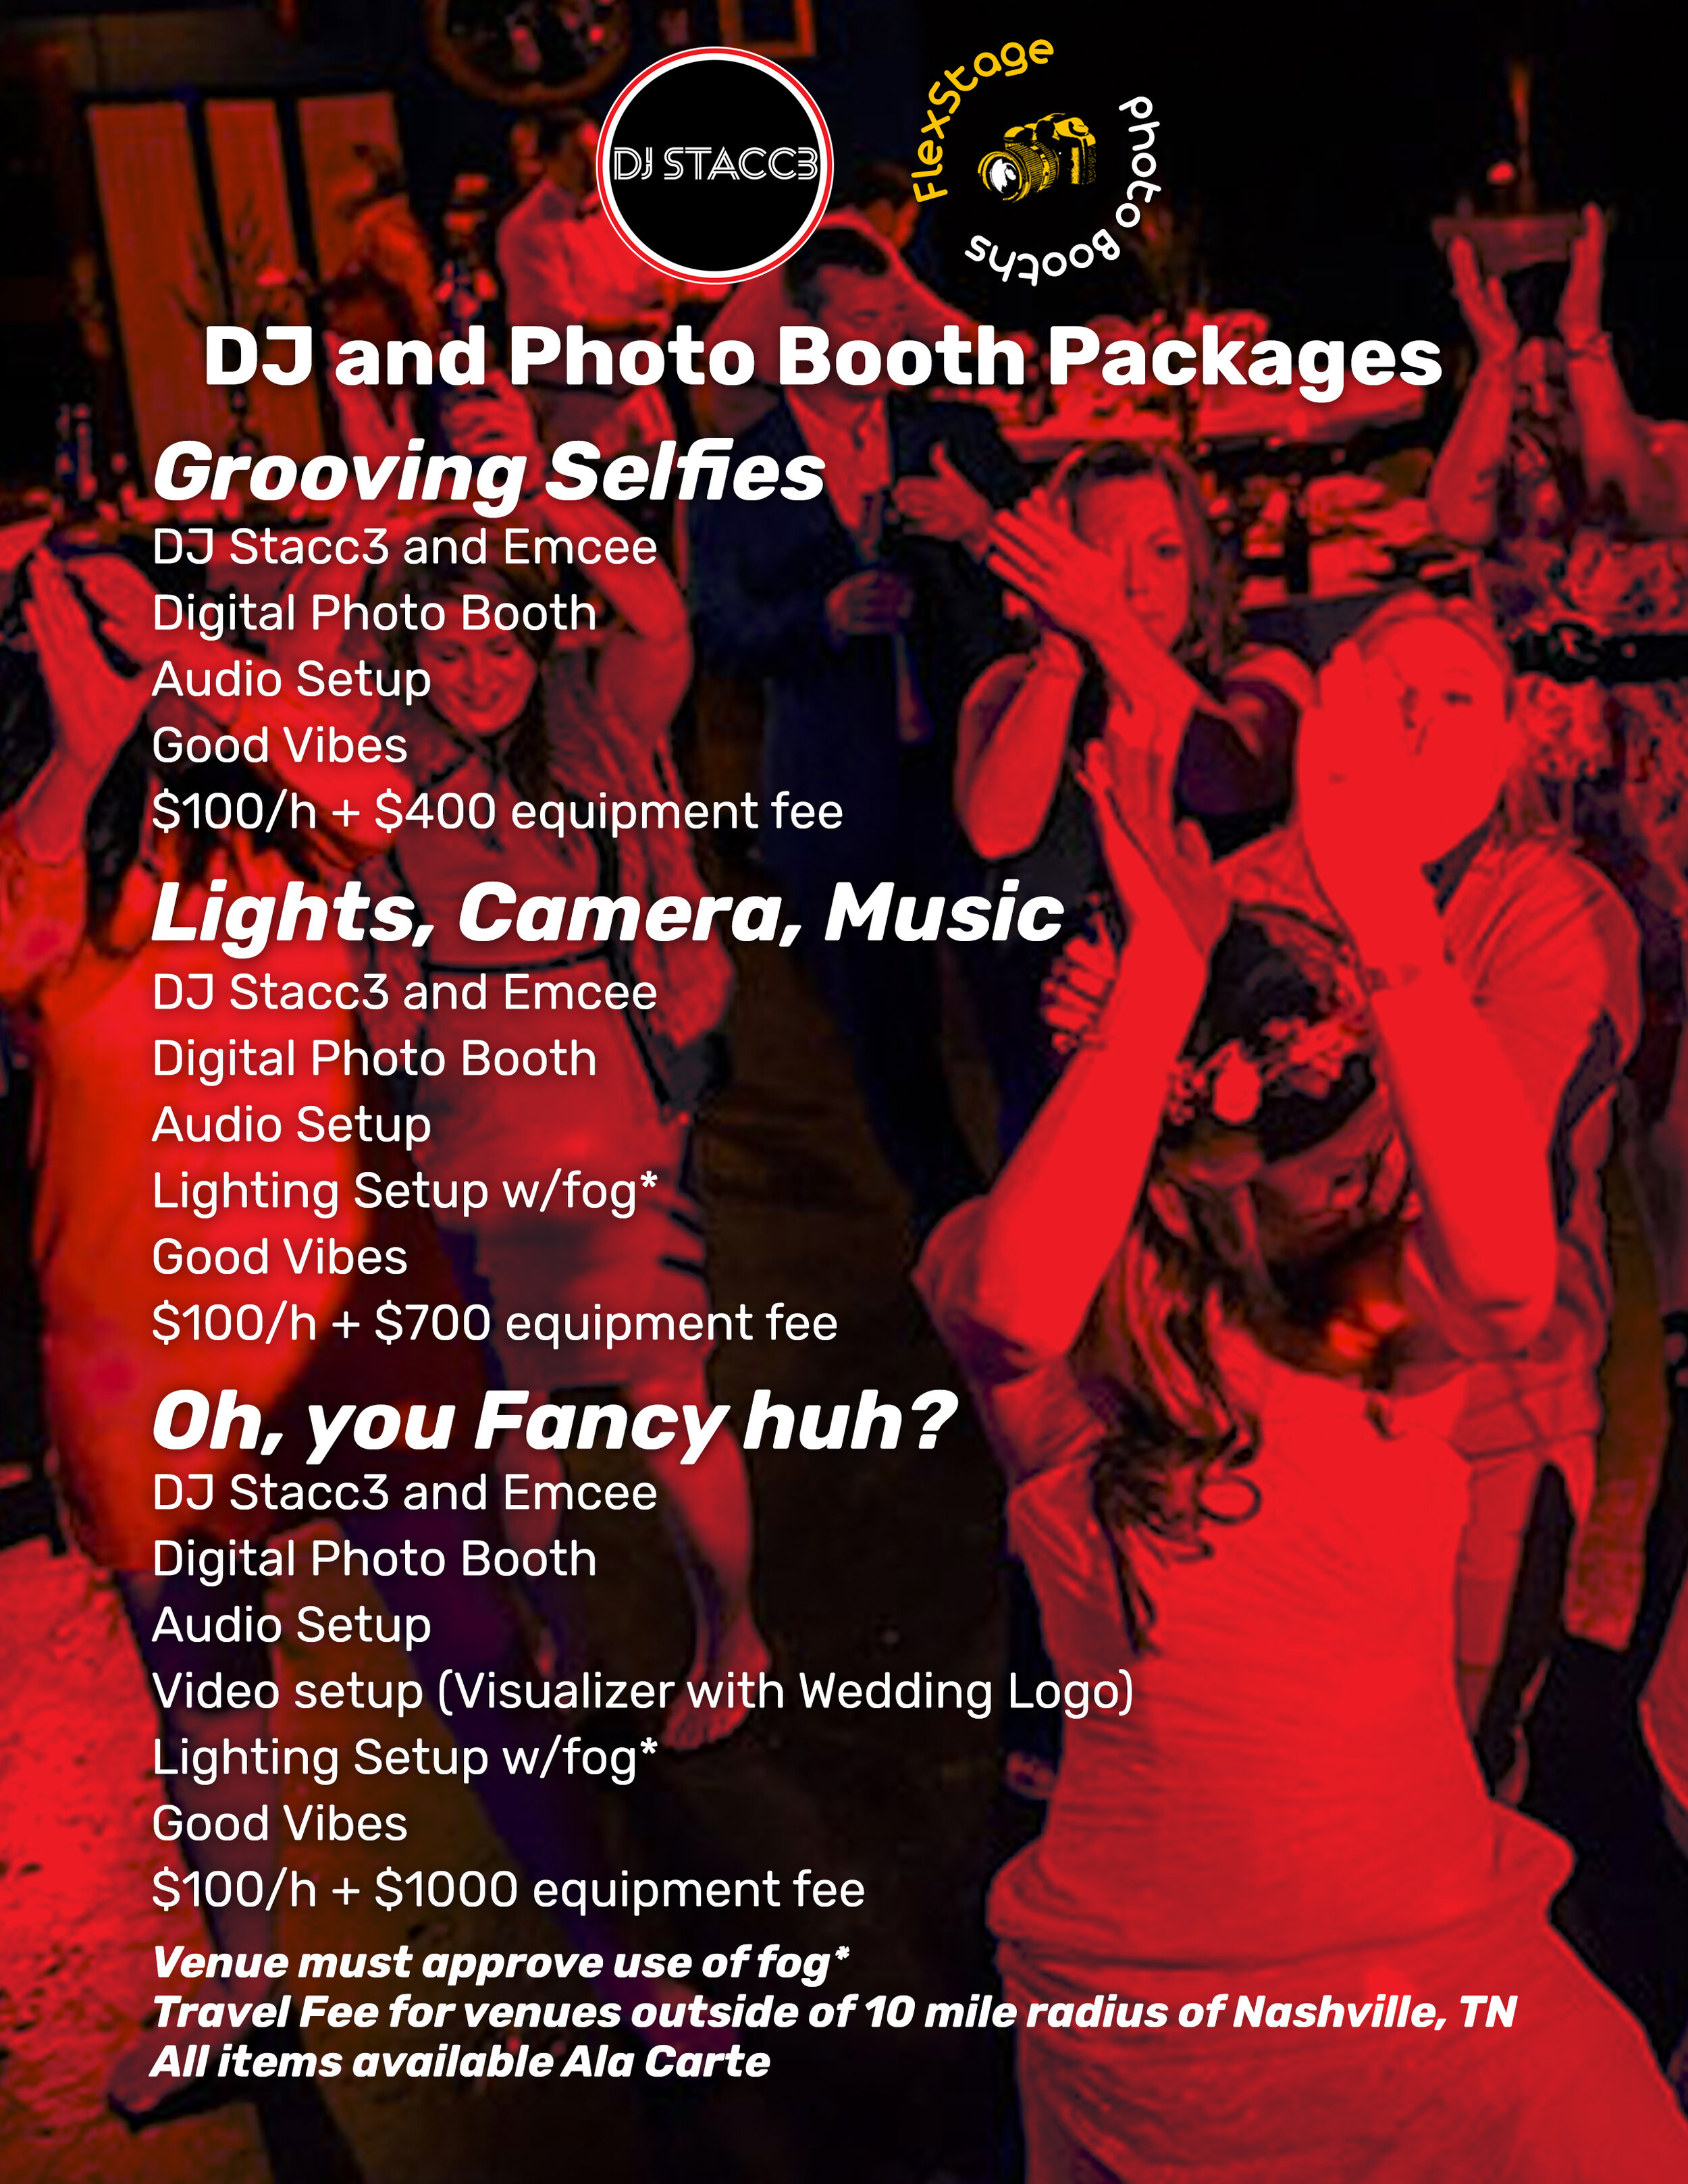 DJ and Photo Booth Packages.jpg